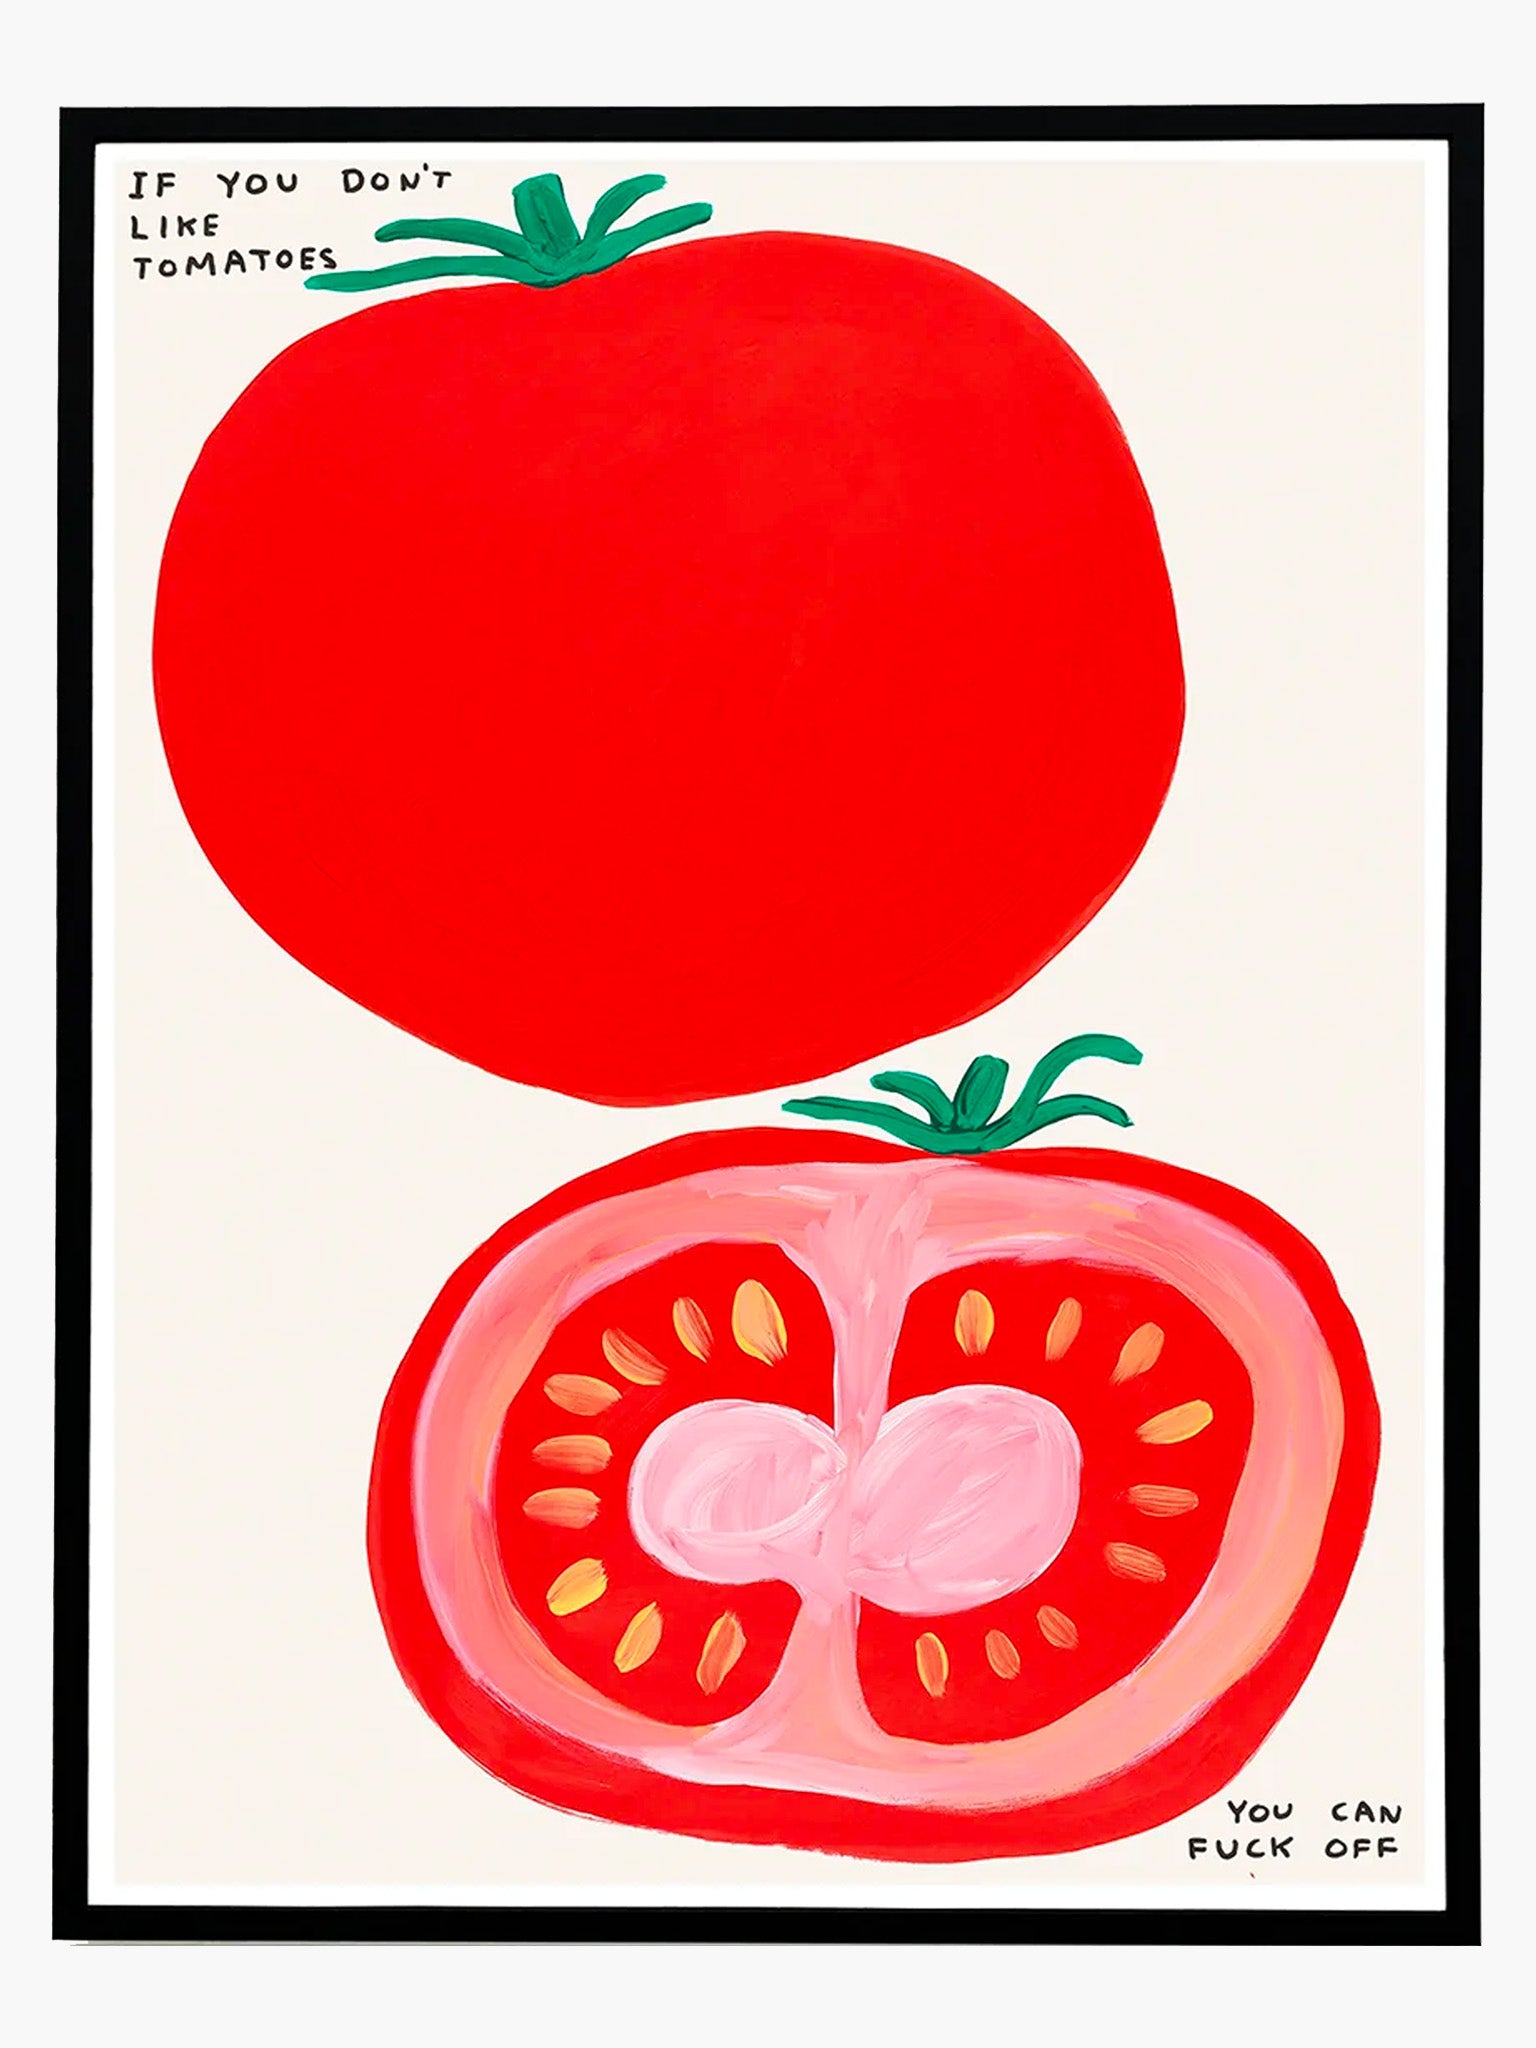 If You Don't Like Tomatoes Poster by David Shrigley (60x80cm)